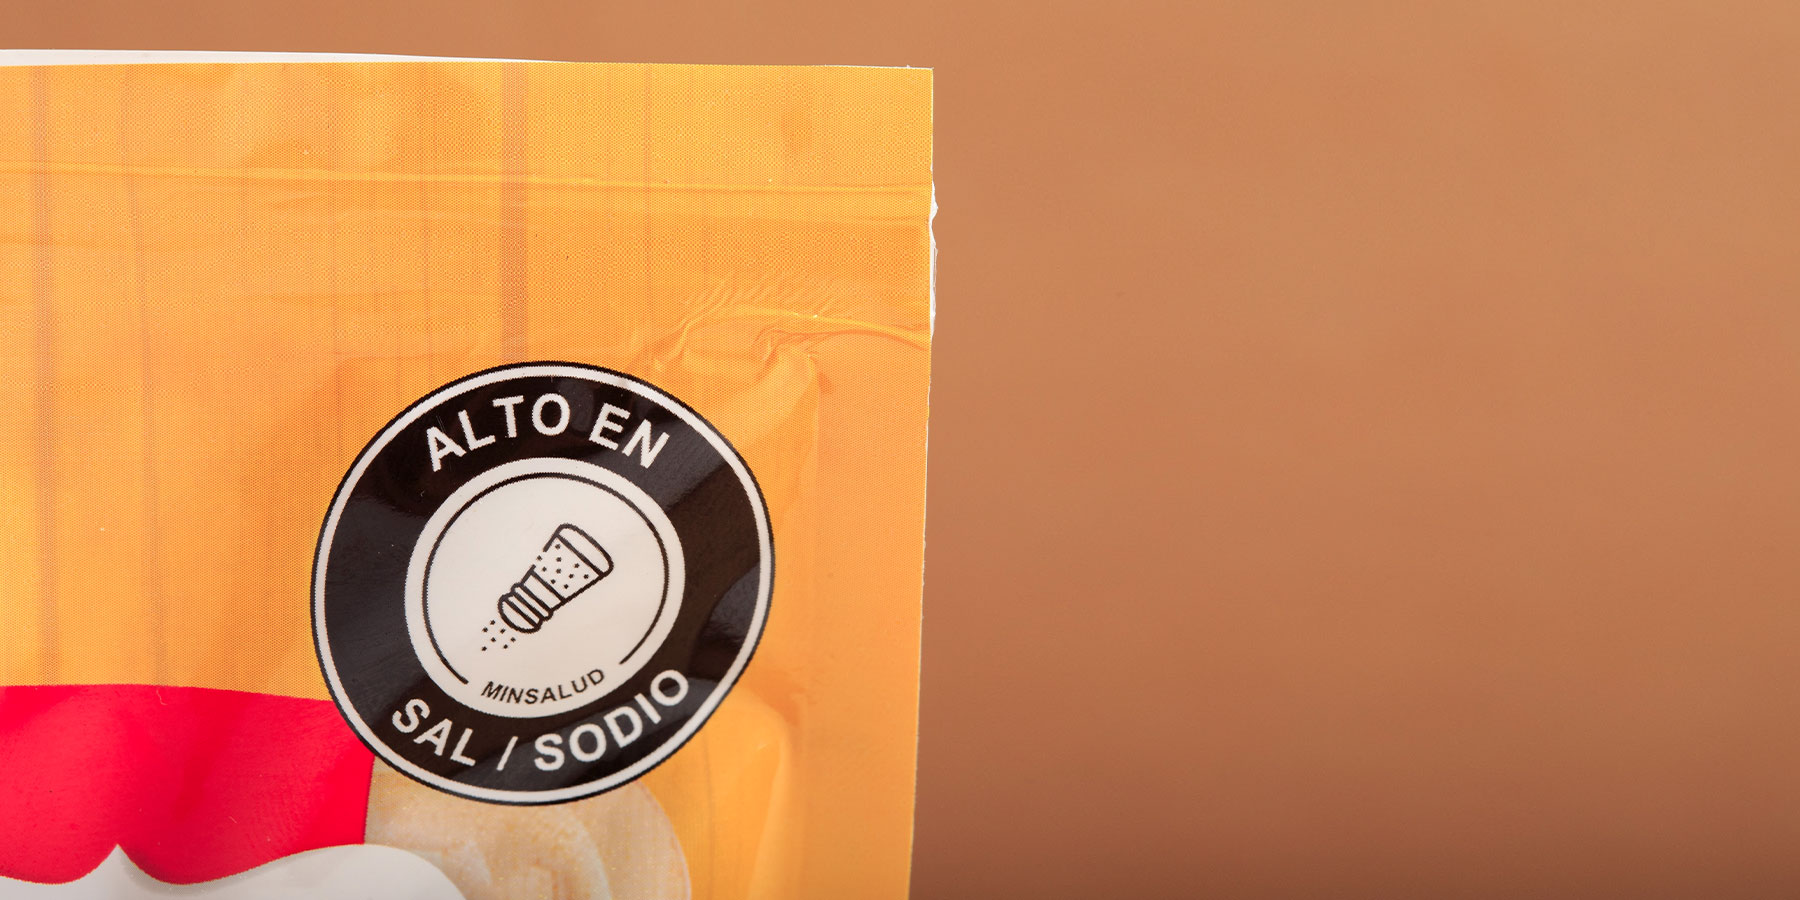 High salt content label in Colombia